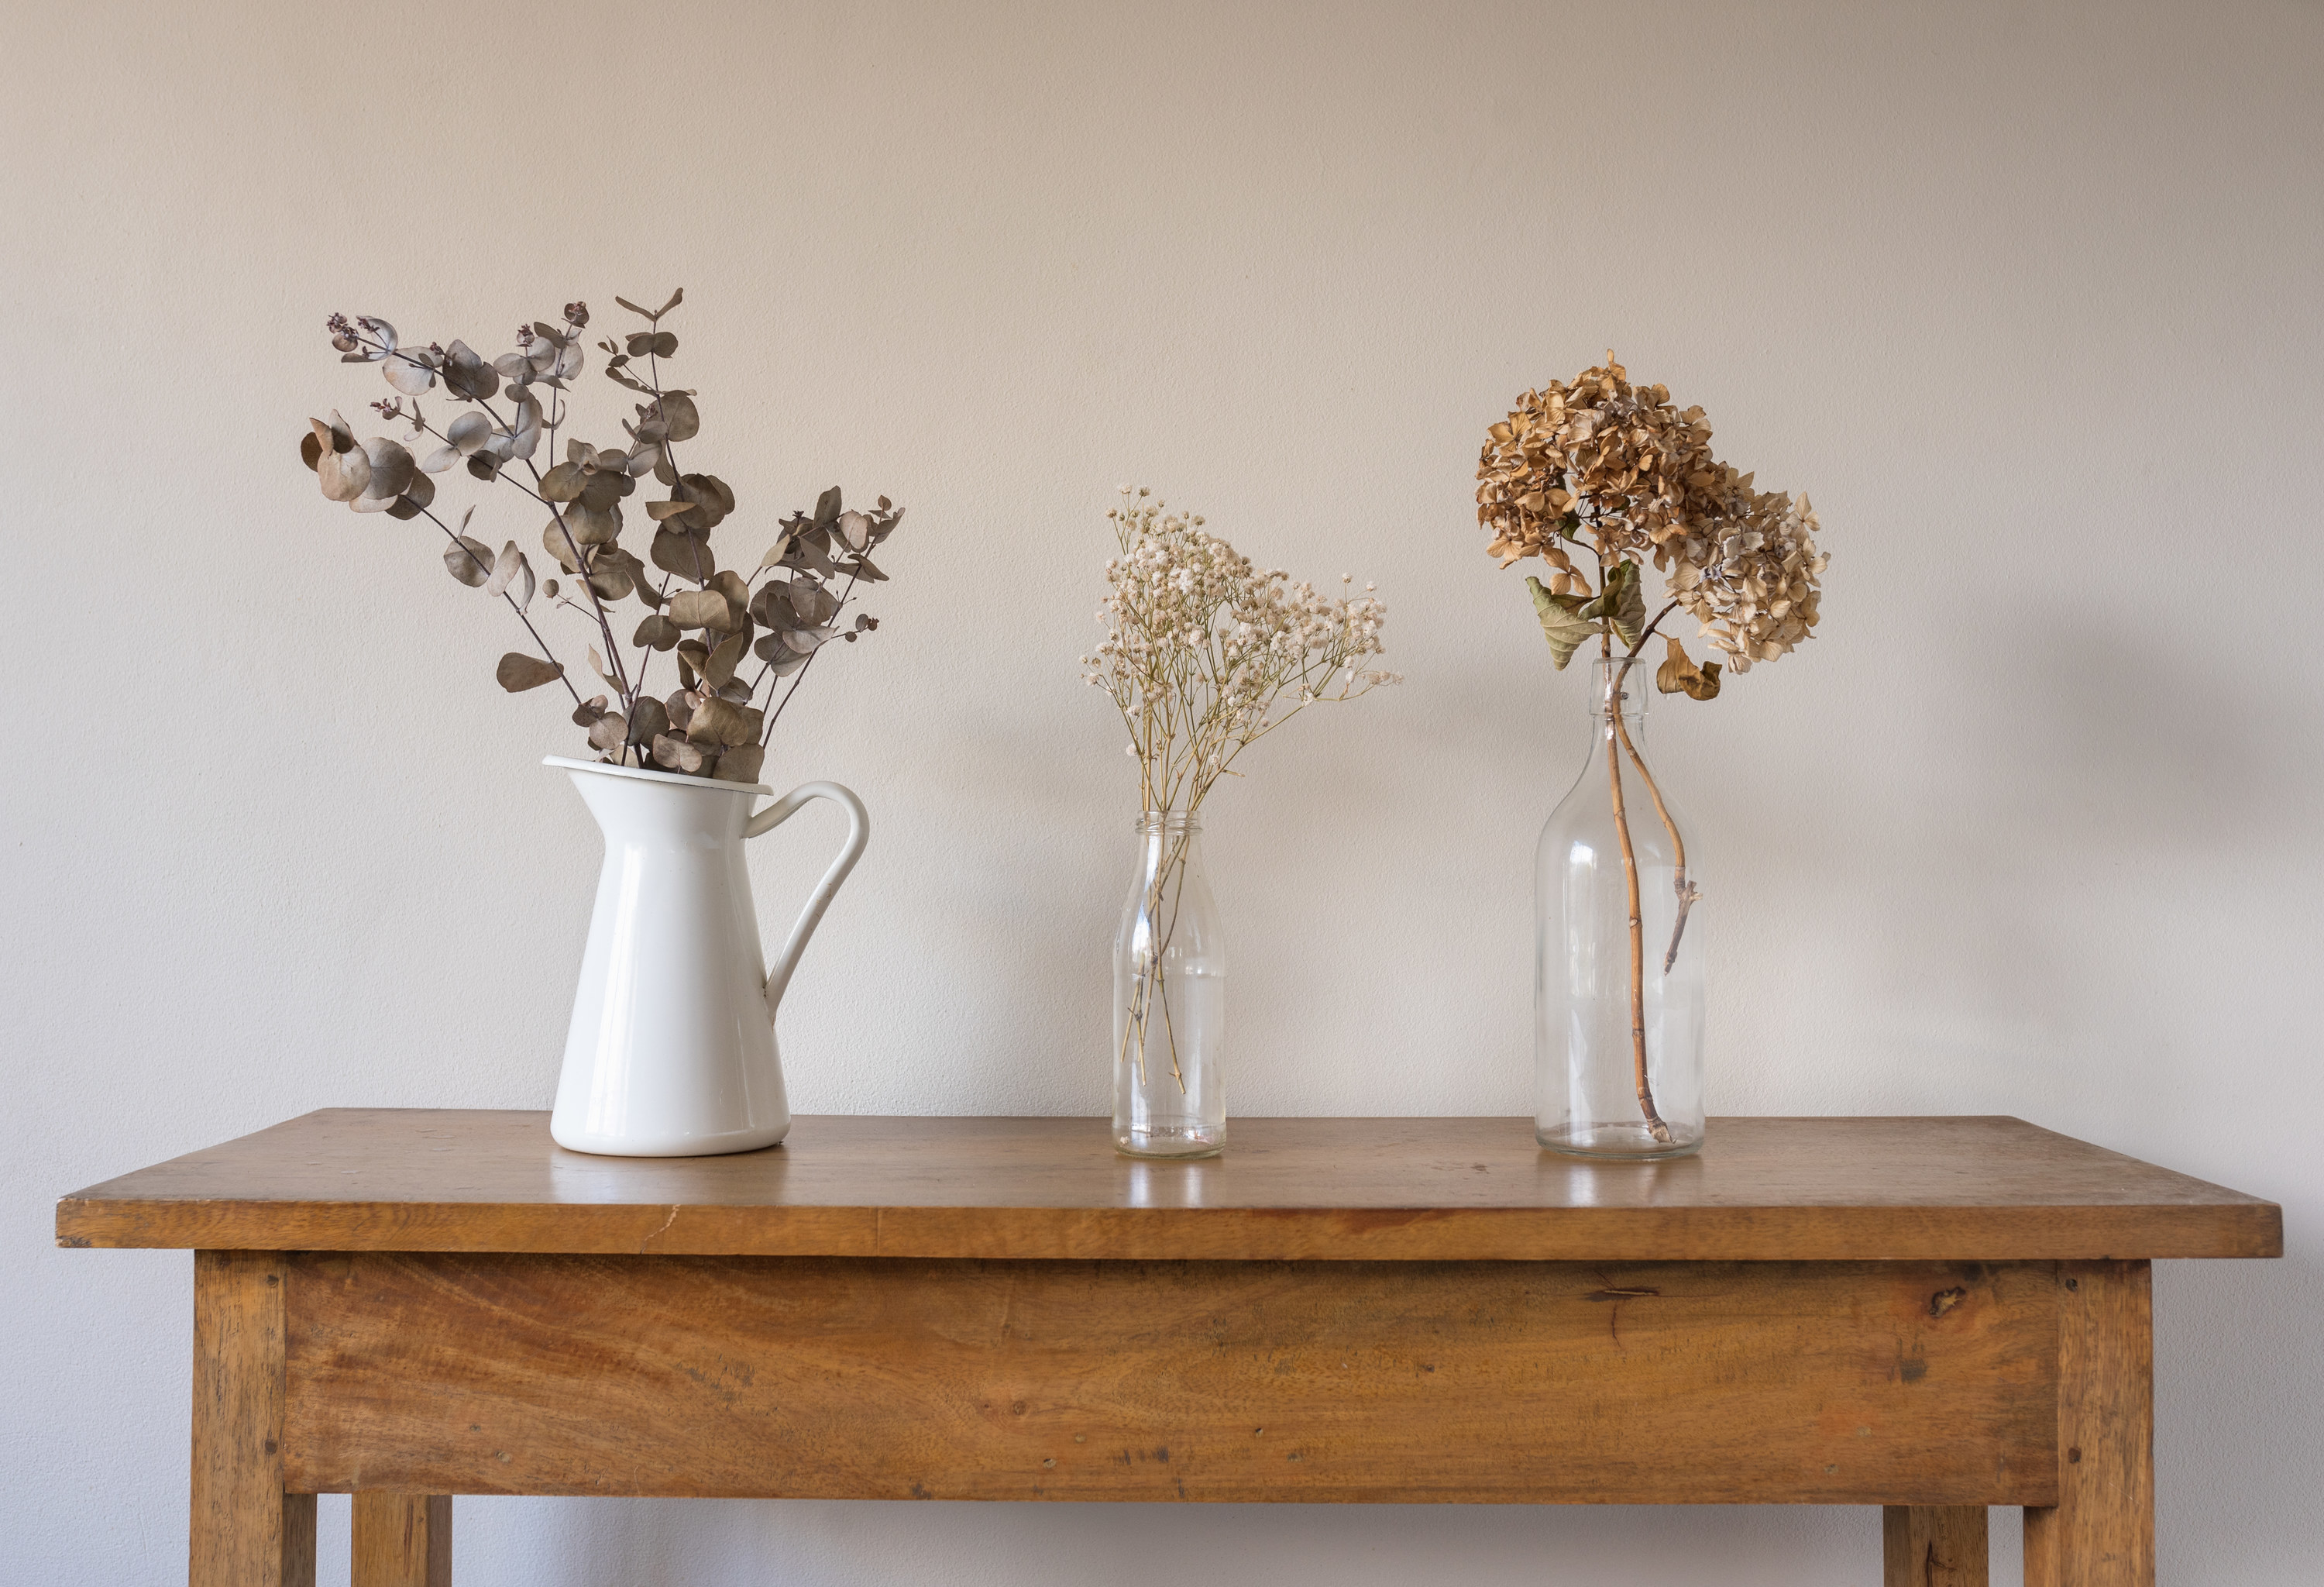 A row of white and glass vases containing simple plants on a table